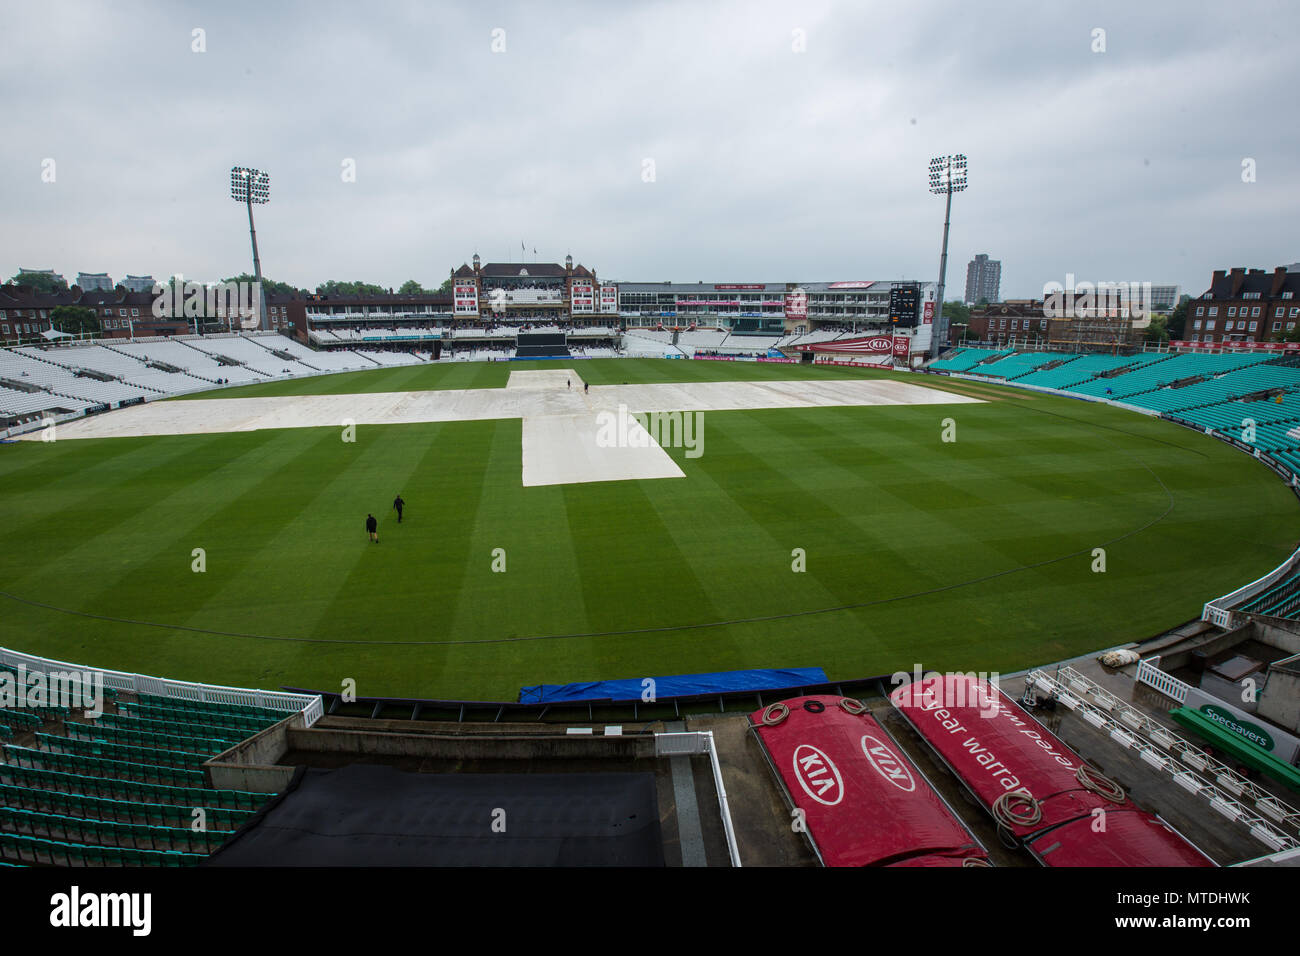 London,UK. 29 May, 2018. The match between Surrey and Sussex in the Royal London One-Day Cup at the Oval was abandoned without a ball being bowled due to heavy rain in London.View from the top of the OCS stand facing the Micky Stewart Members' Pavilion. David Rowe/Alamy Live News Stock Photo